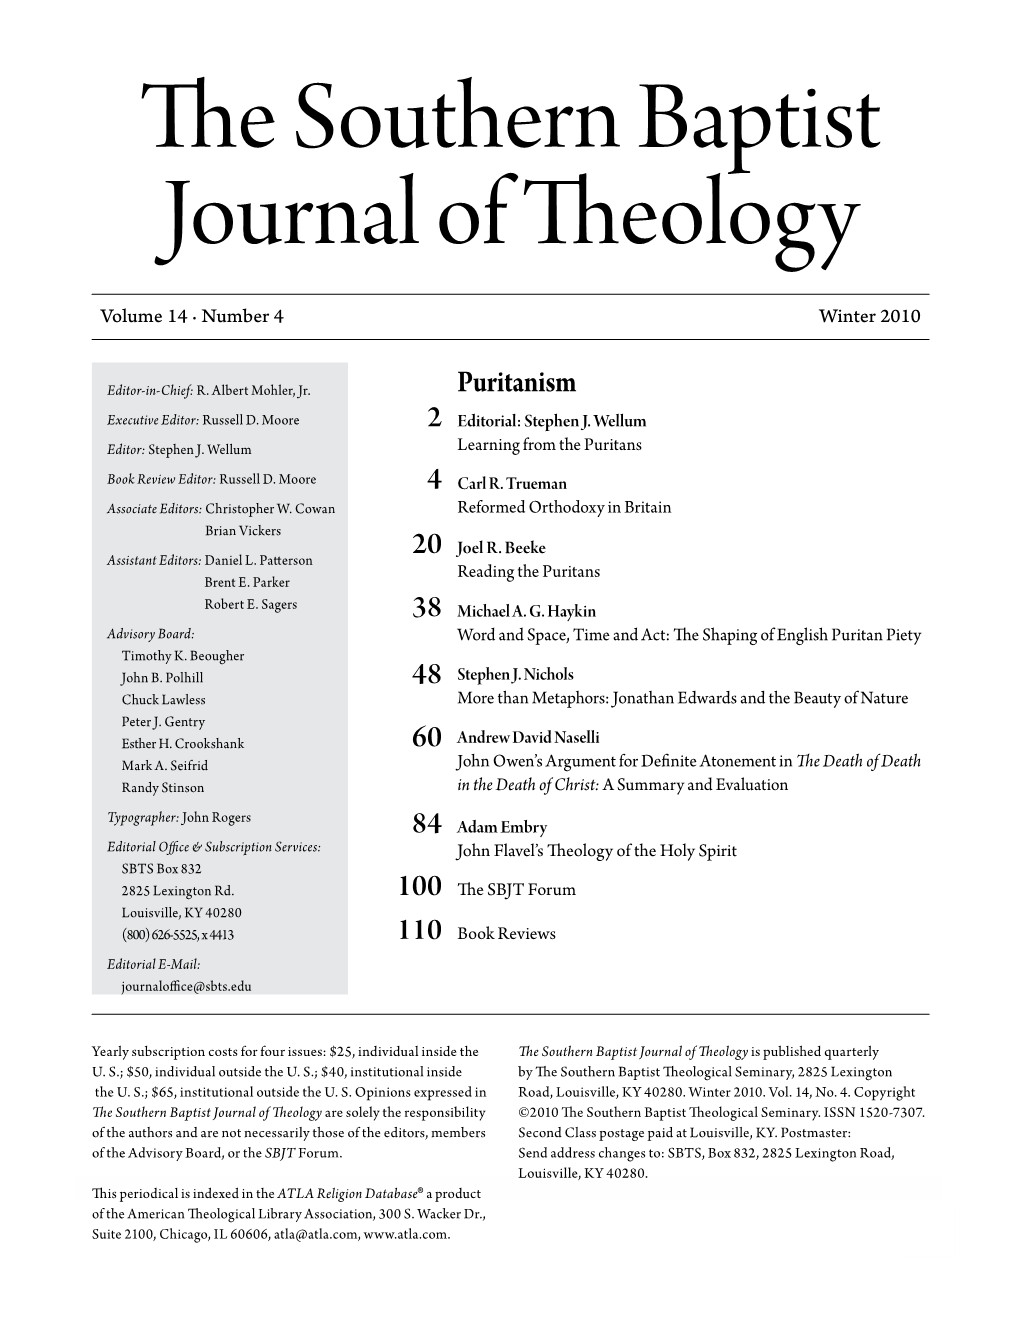 The Southern Baptist Journal of Theology